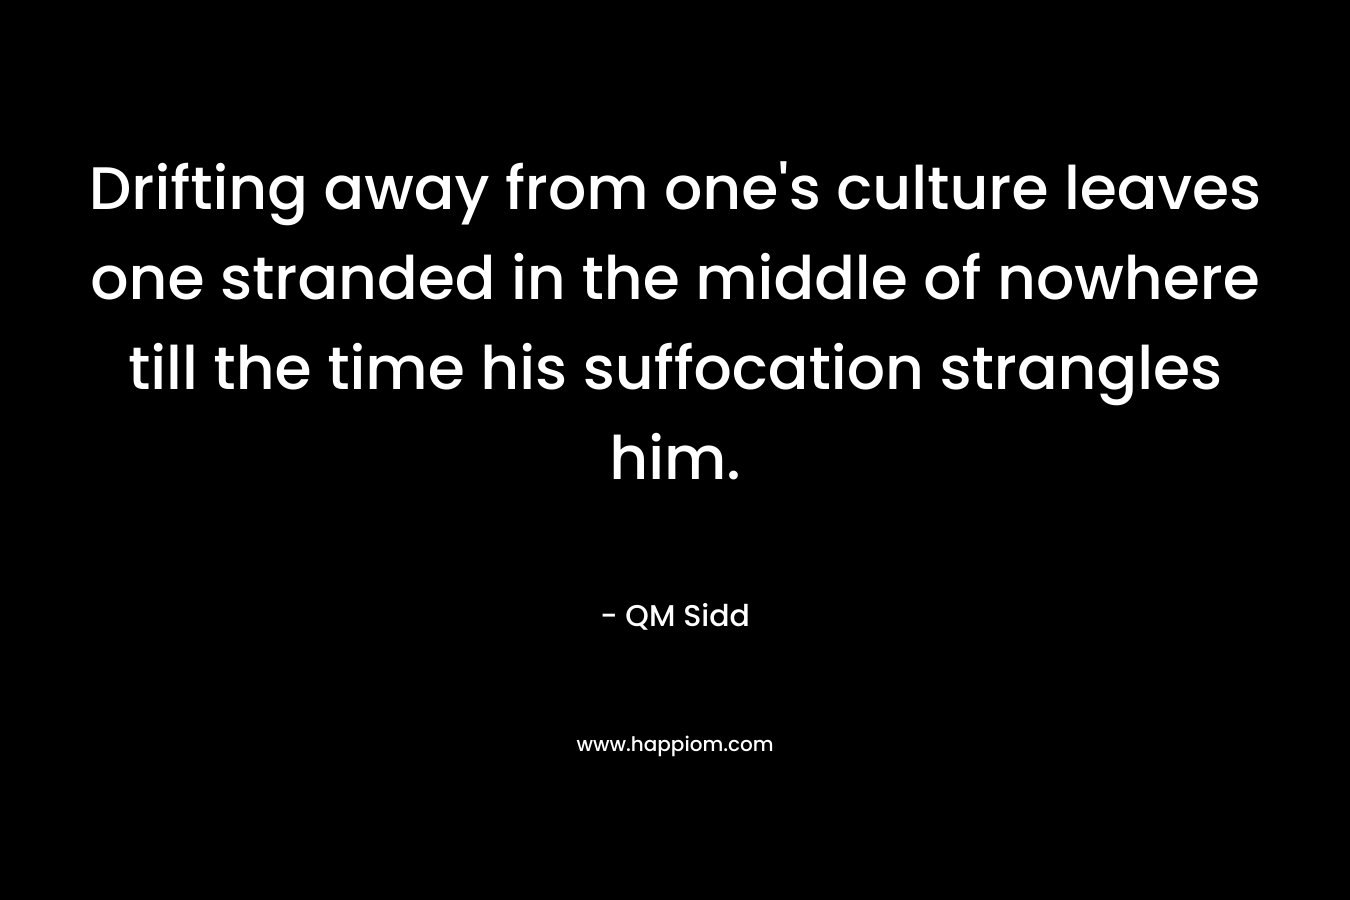 Drifting away from one’s culture leaves one stranded in the middle of nowhere till the time his suffocation strangles him. – QM Sidd